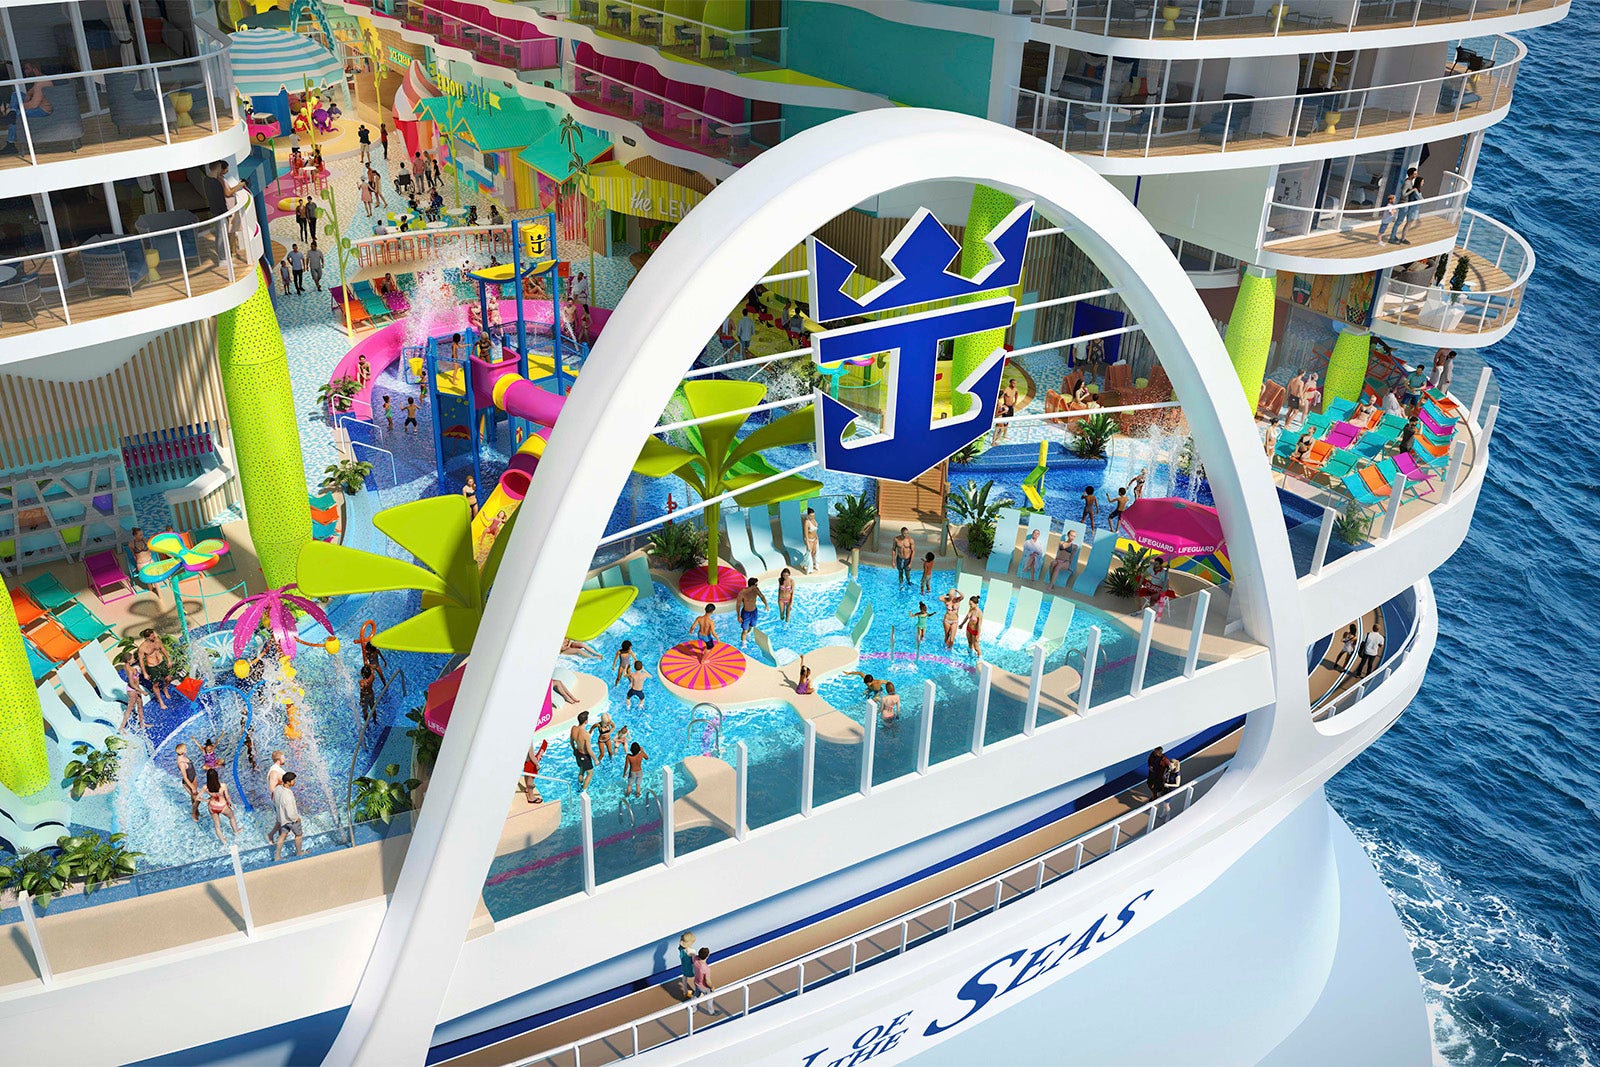 Royal Caribbean’s new cruise ship aims to be the ideal vacation for young families